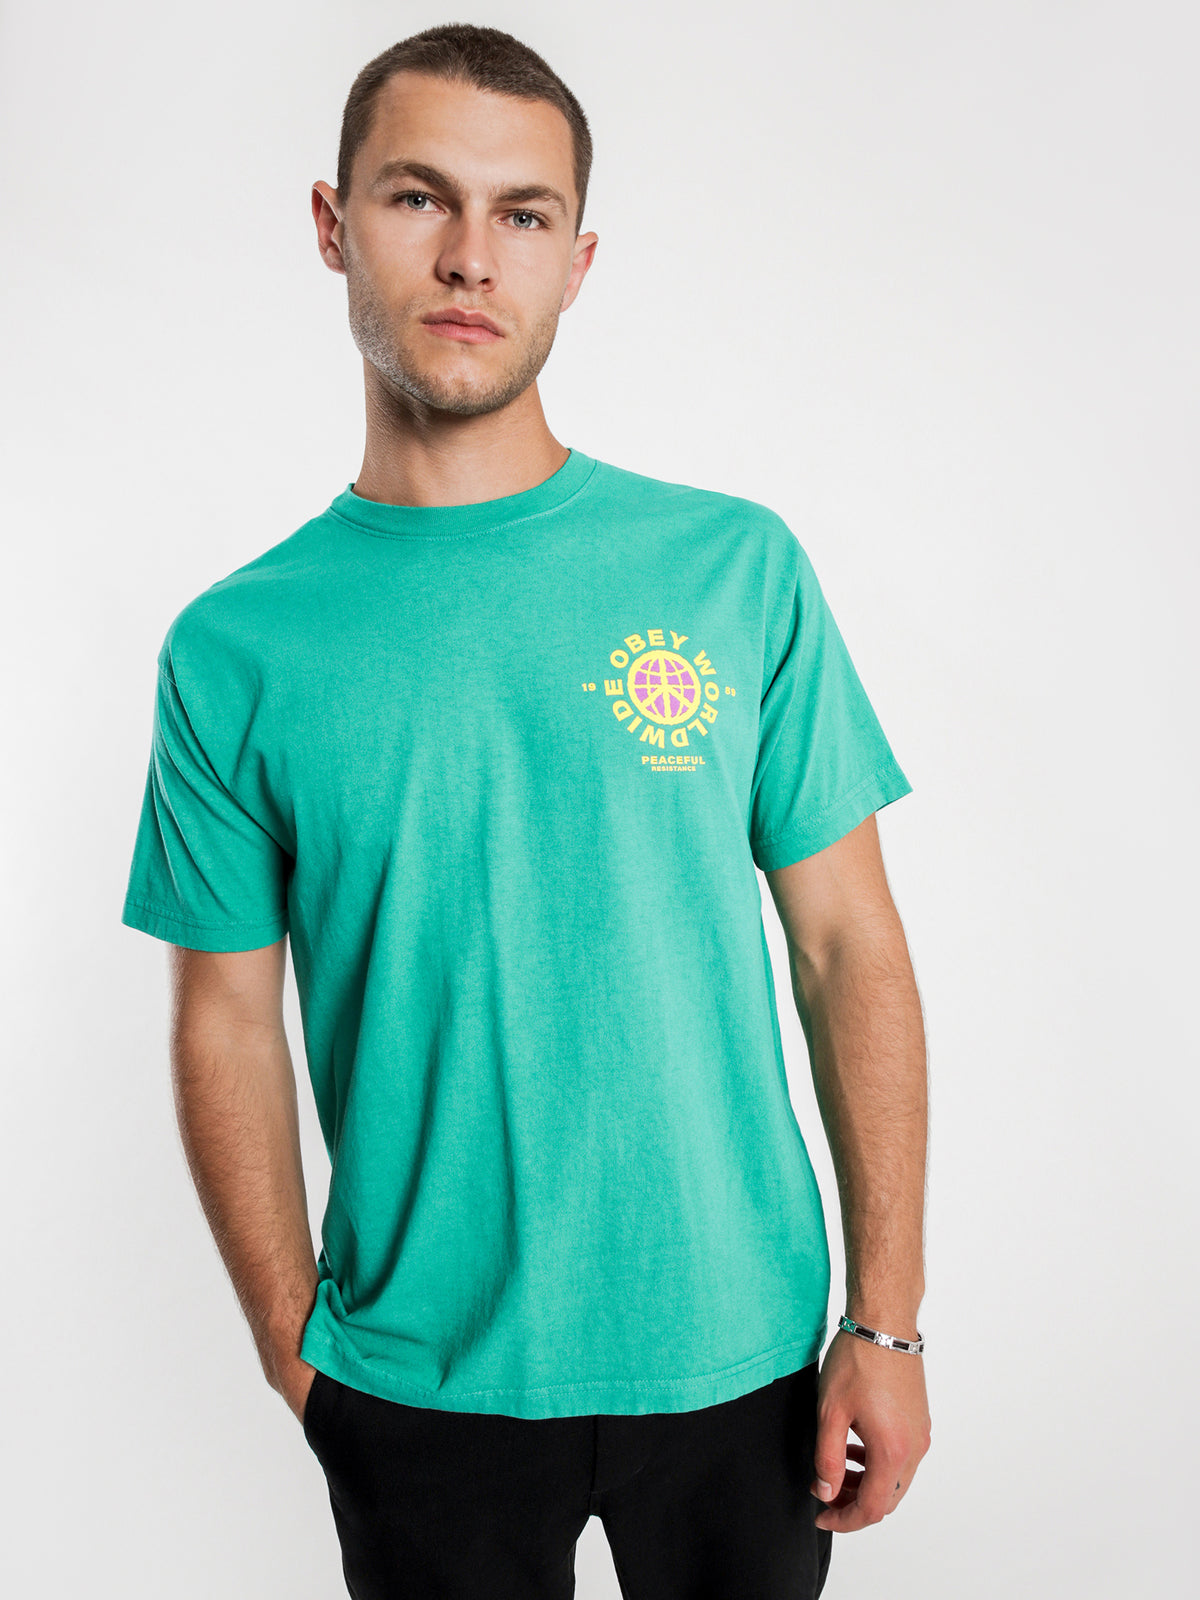 Obey Peaceful Resistance T-Shirt in Emerald